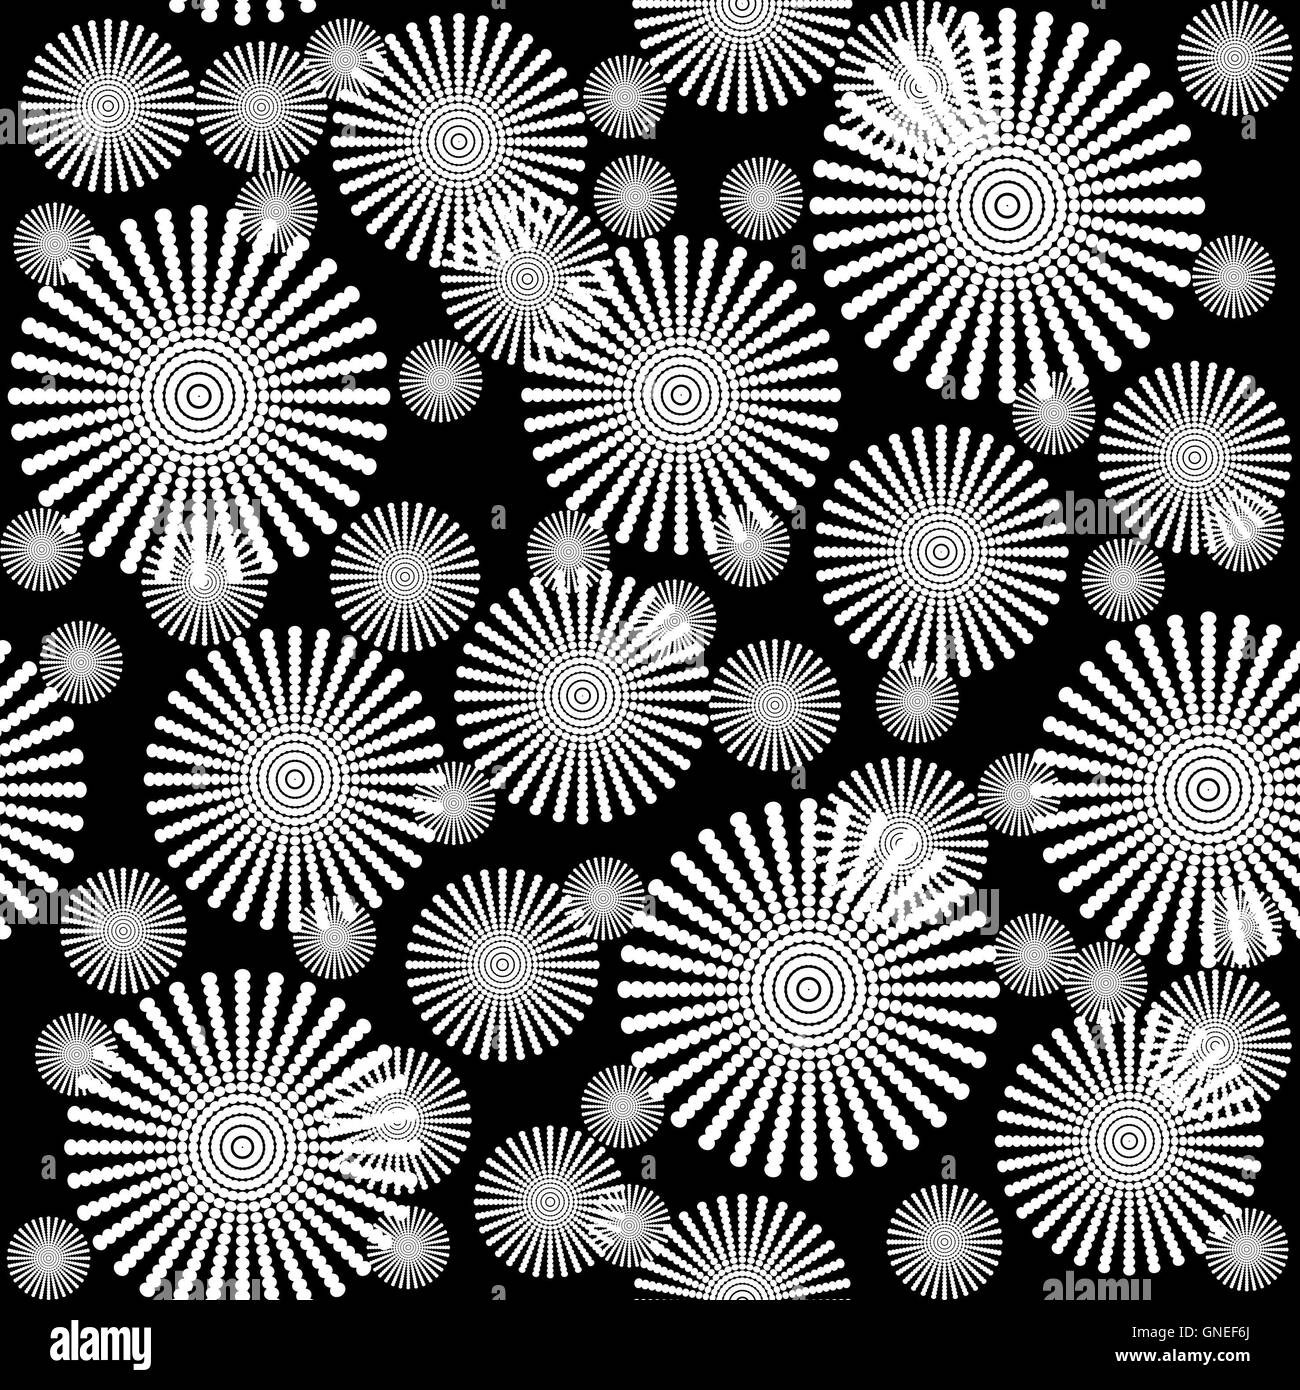 Black and white floral background, seamless pattern Stock Photo